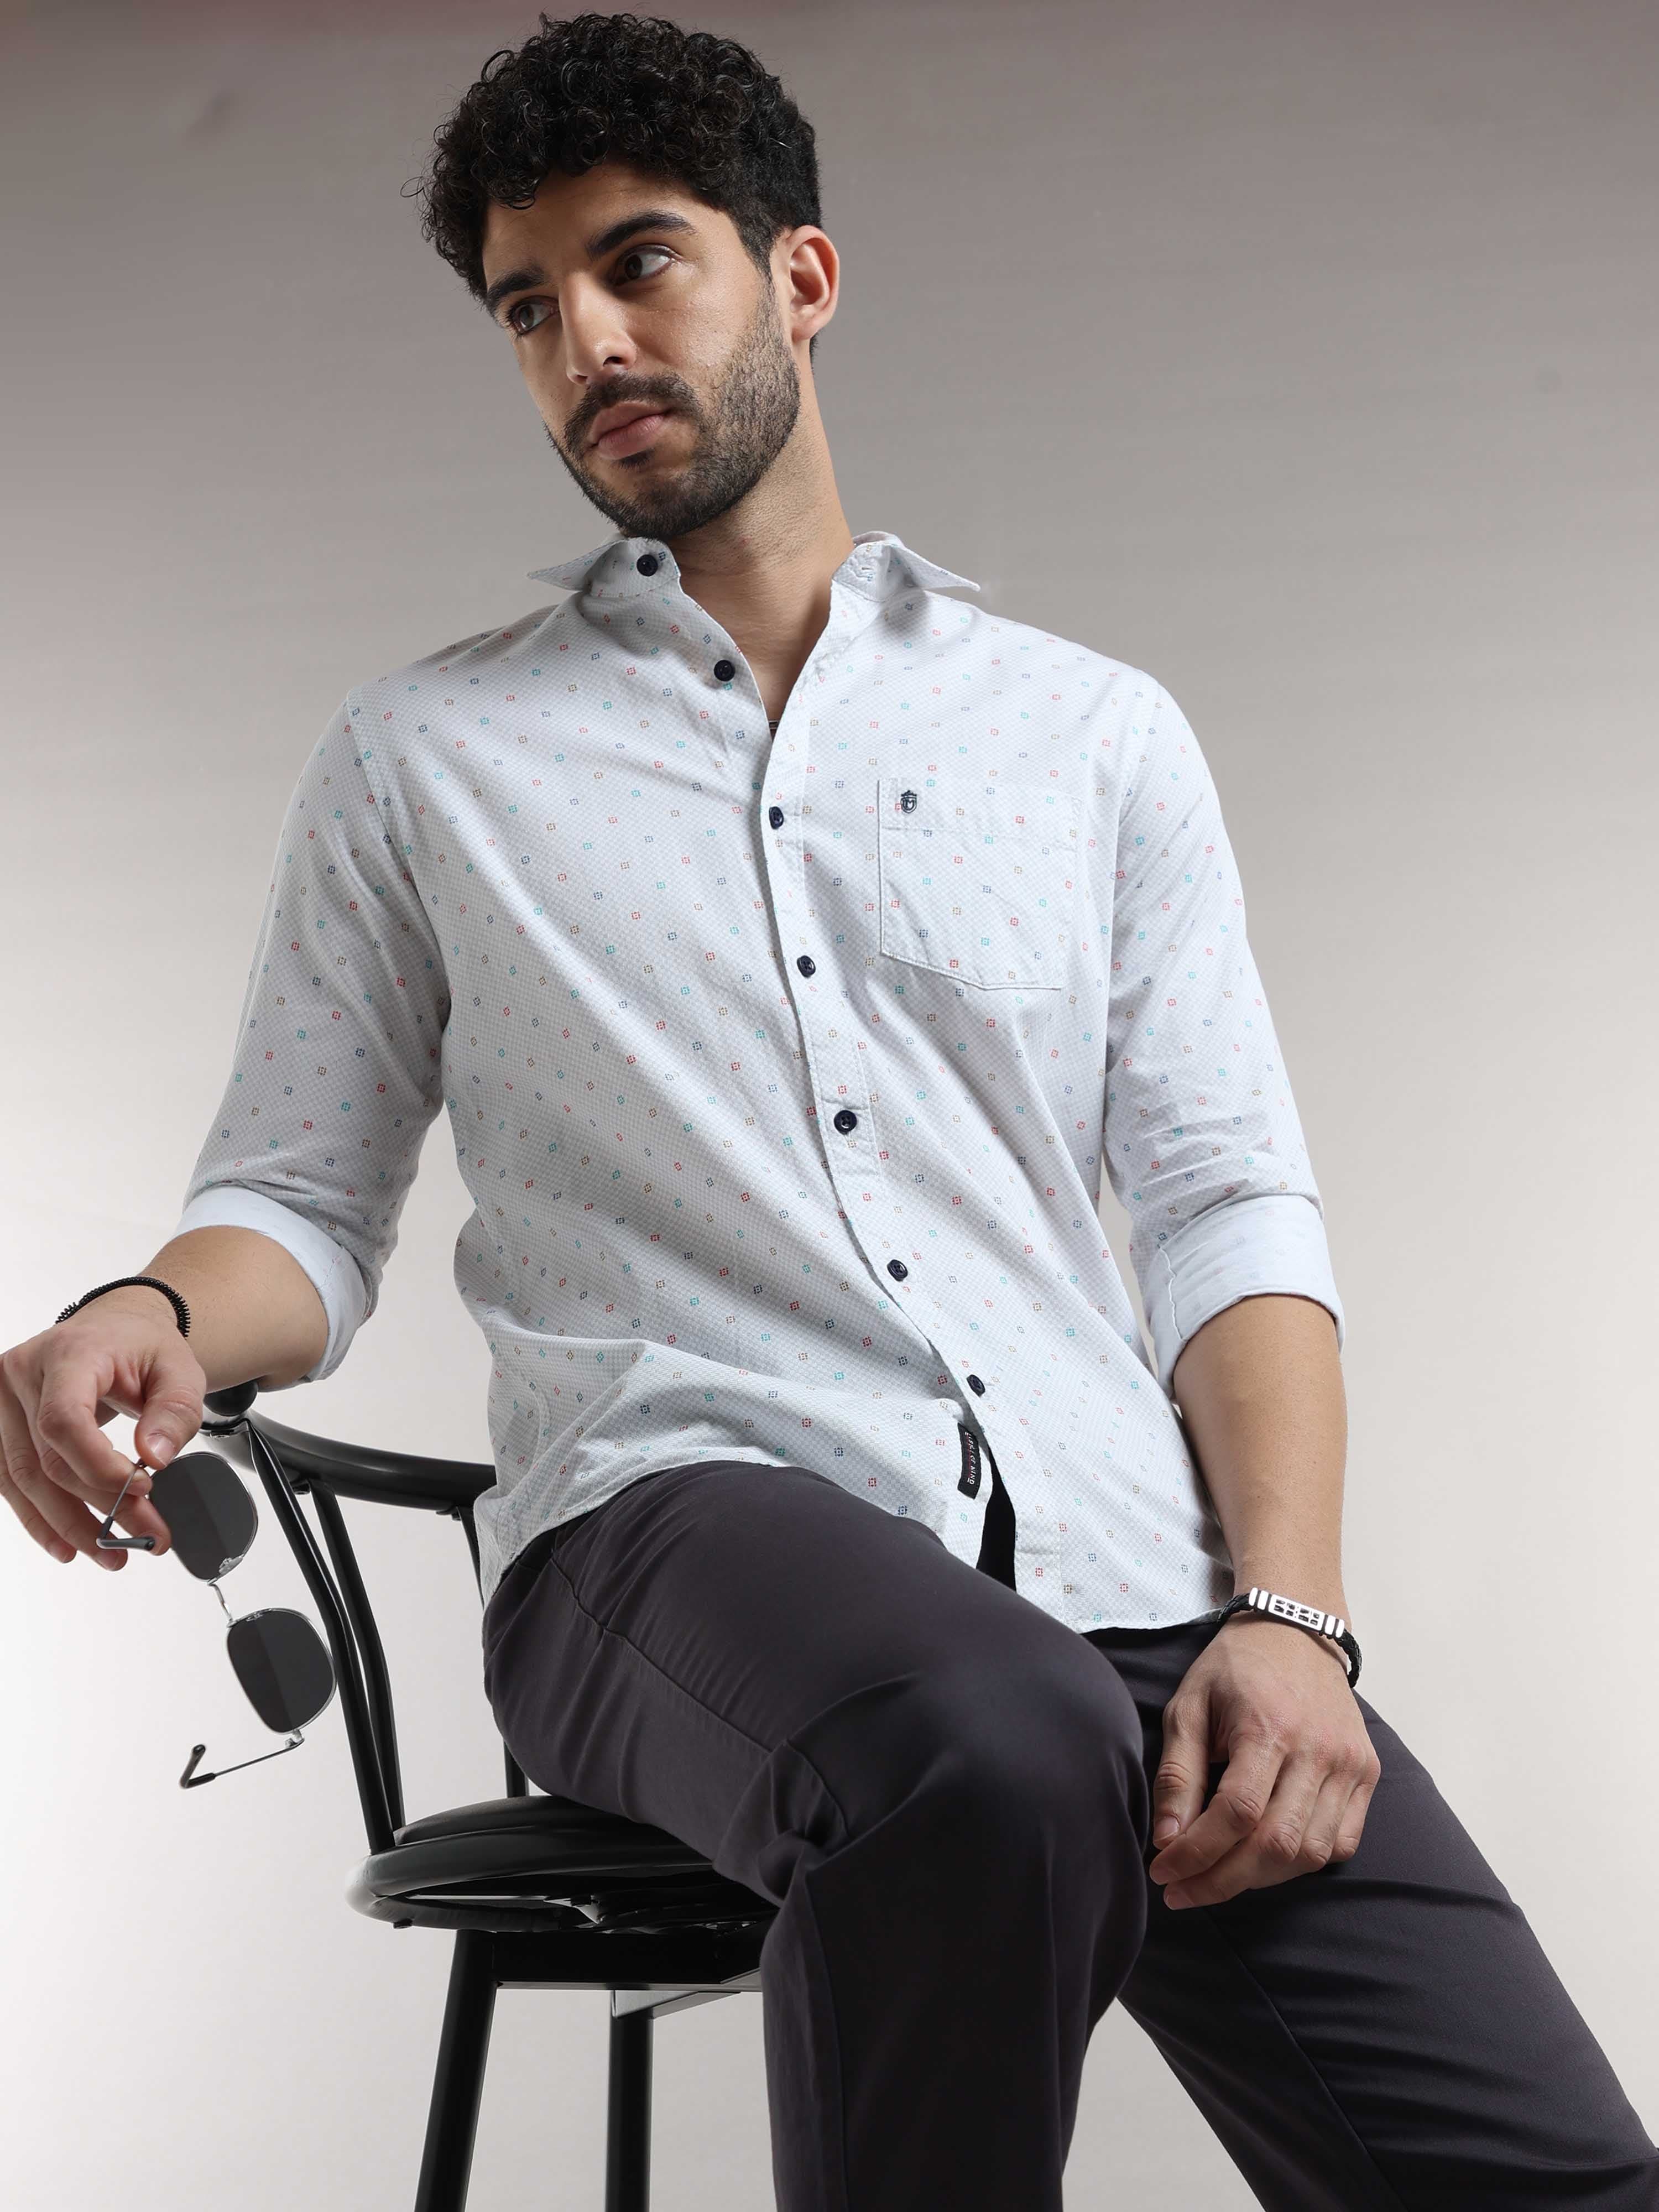 Shop Stylish White Printed Shirt Online at Great PriceRs. 1299.00